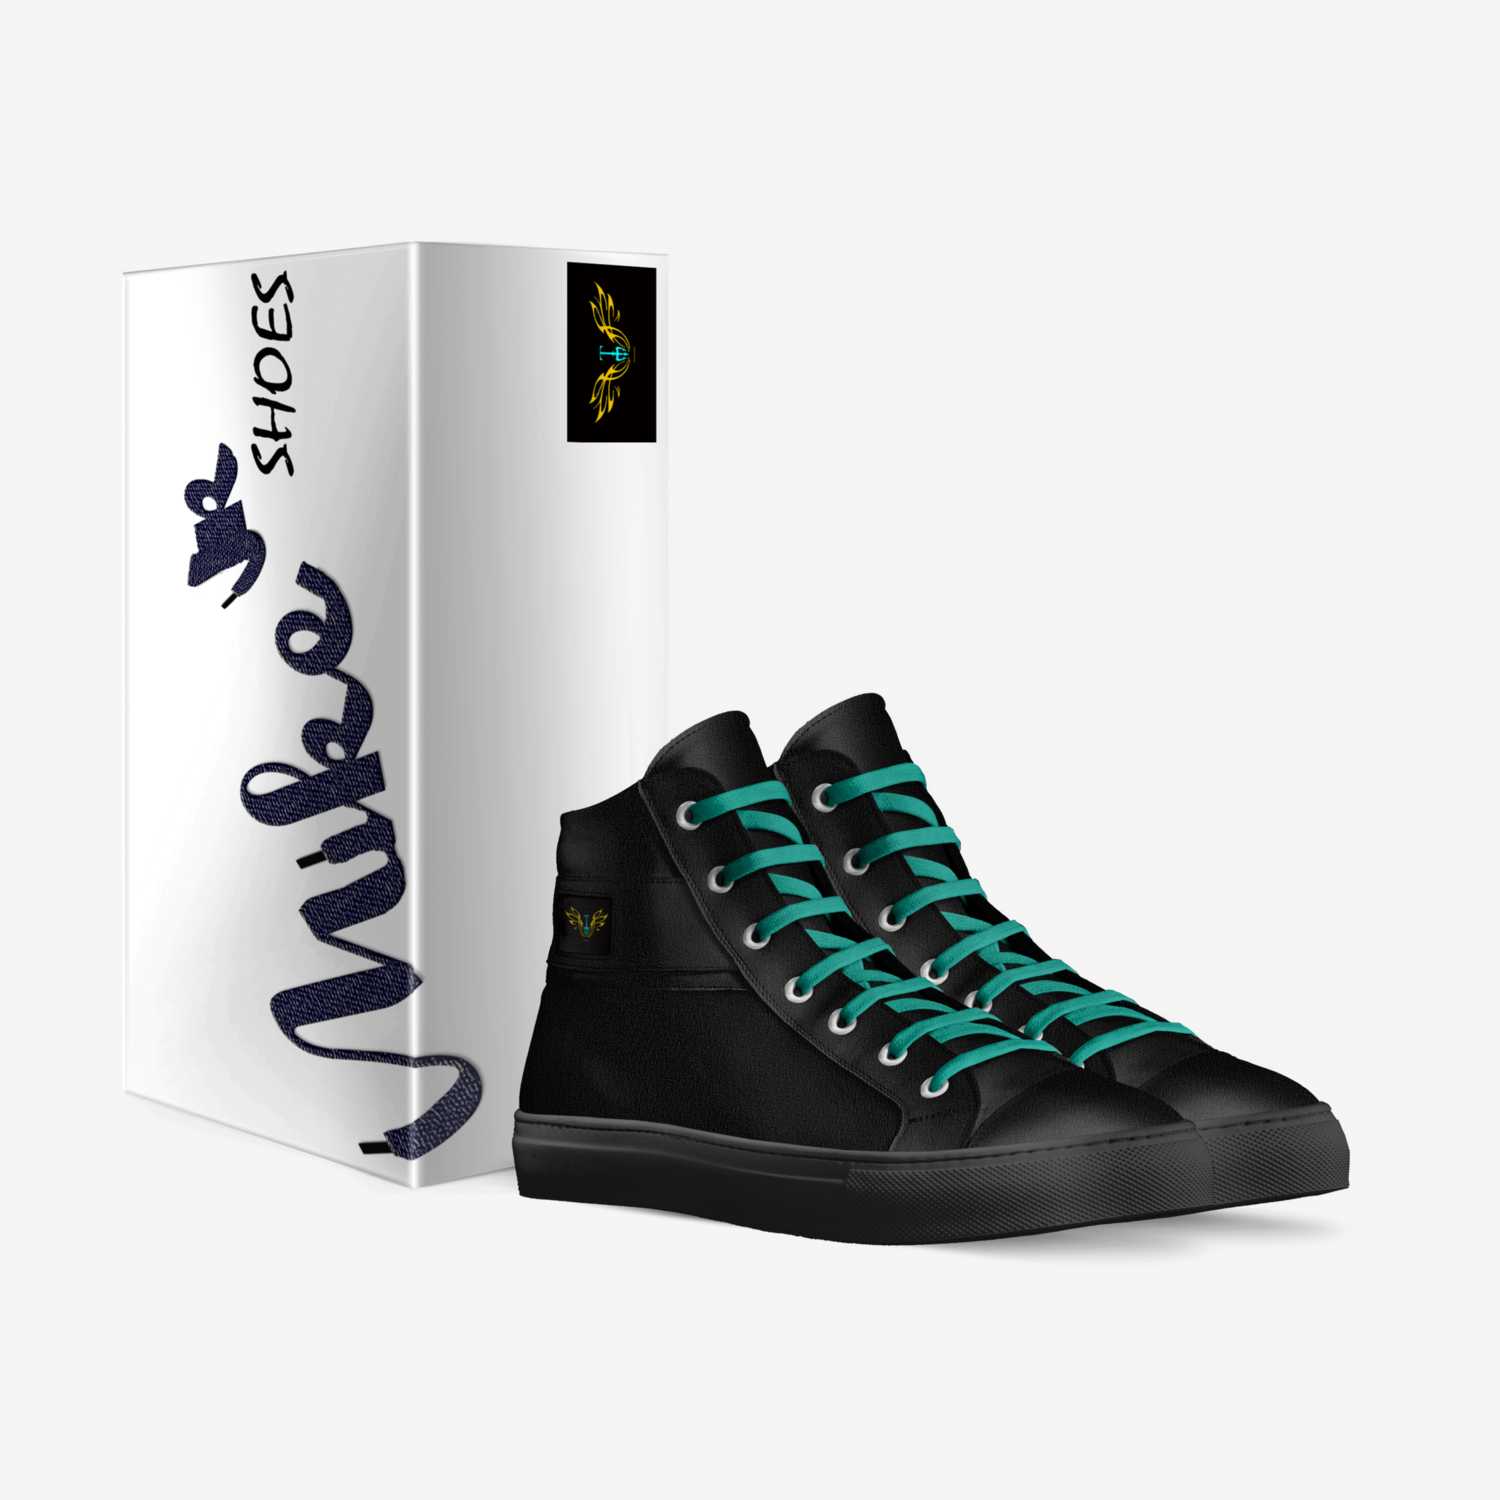 Luxury custom made in Italy shoes by Mike Beers | Box view